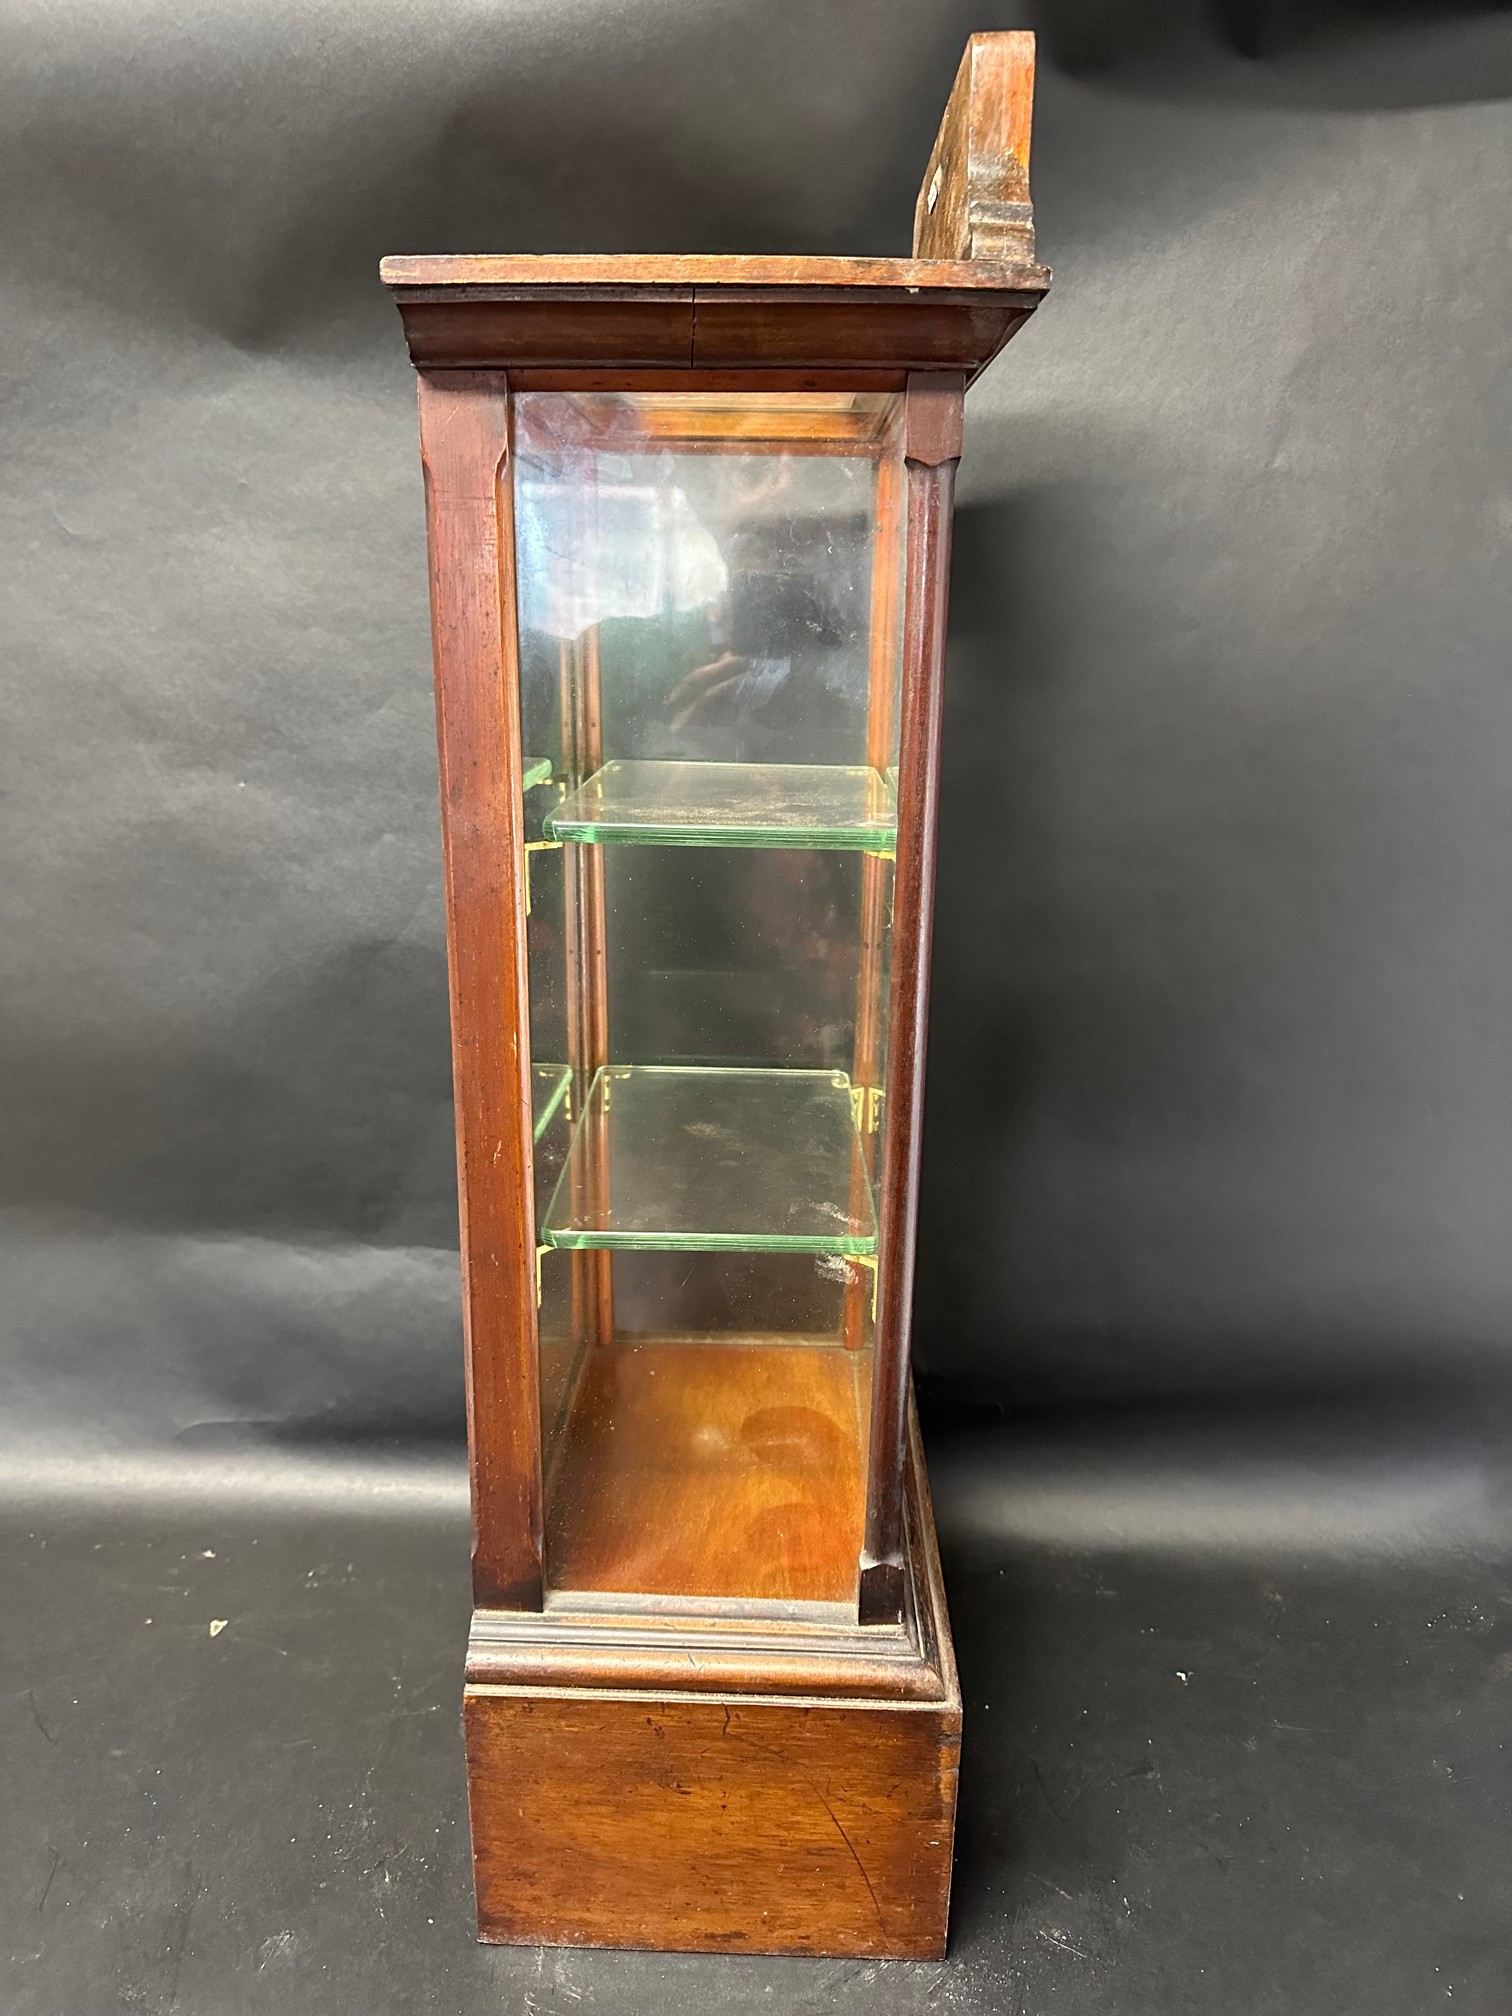 An Allen & Hanburys' Jujubes & Pastilles display cabinet with glass pediment and etched Voice, - Image 10 of 10